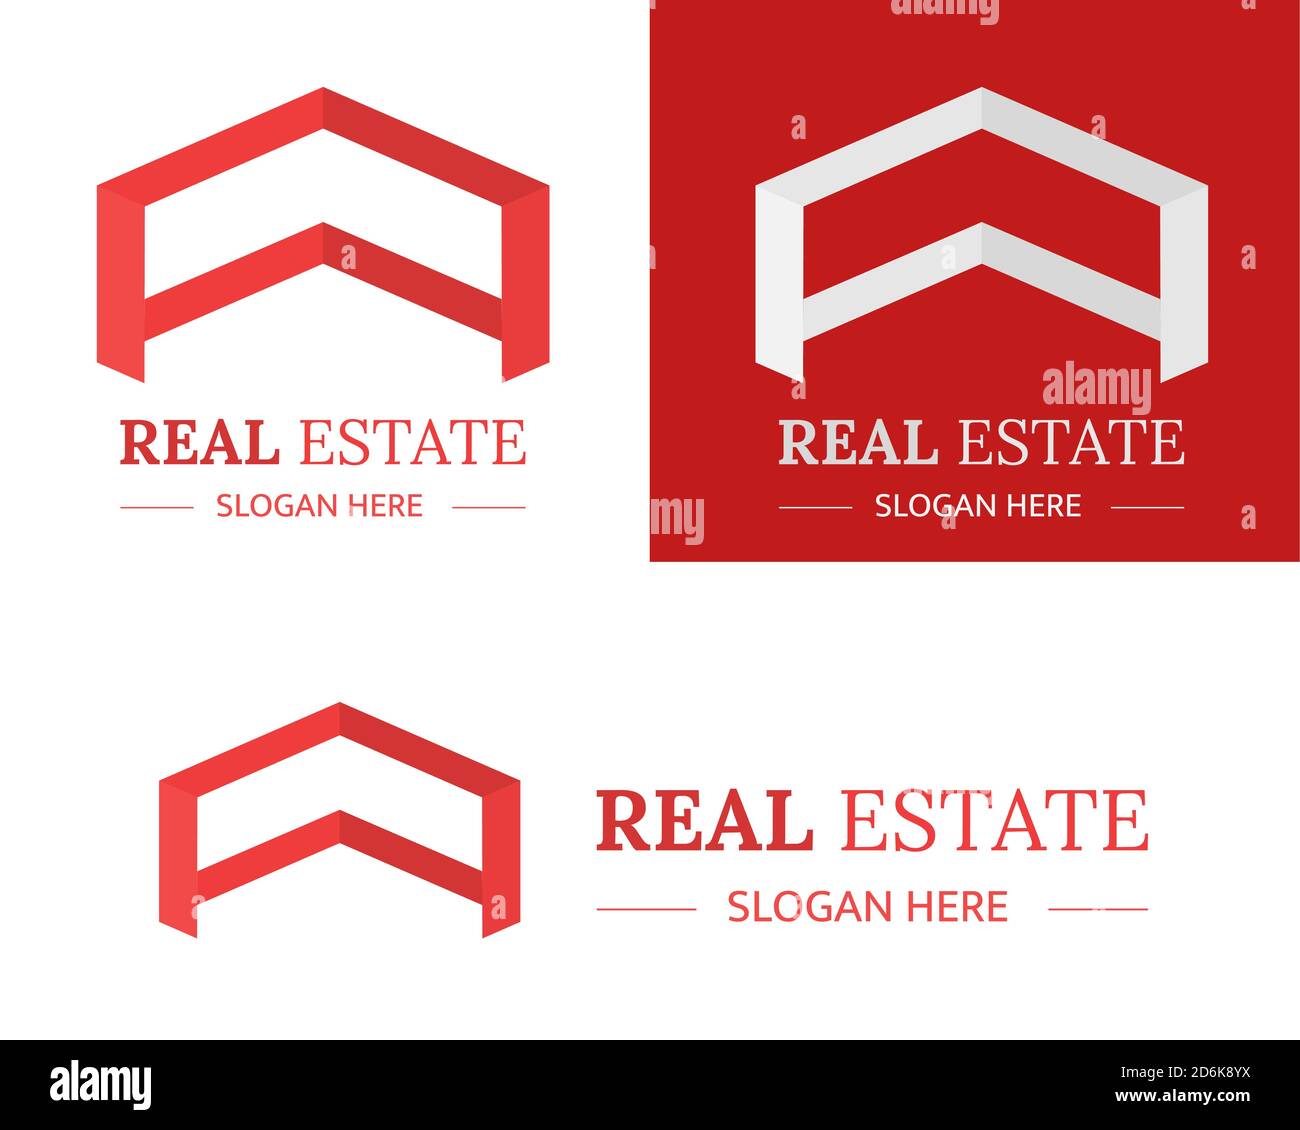 Illustration vector design of real estate logo template for business or company Stock Vector